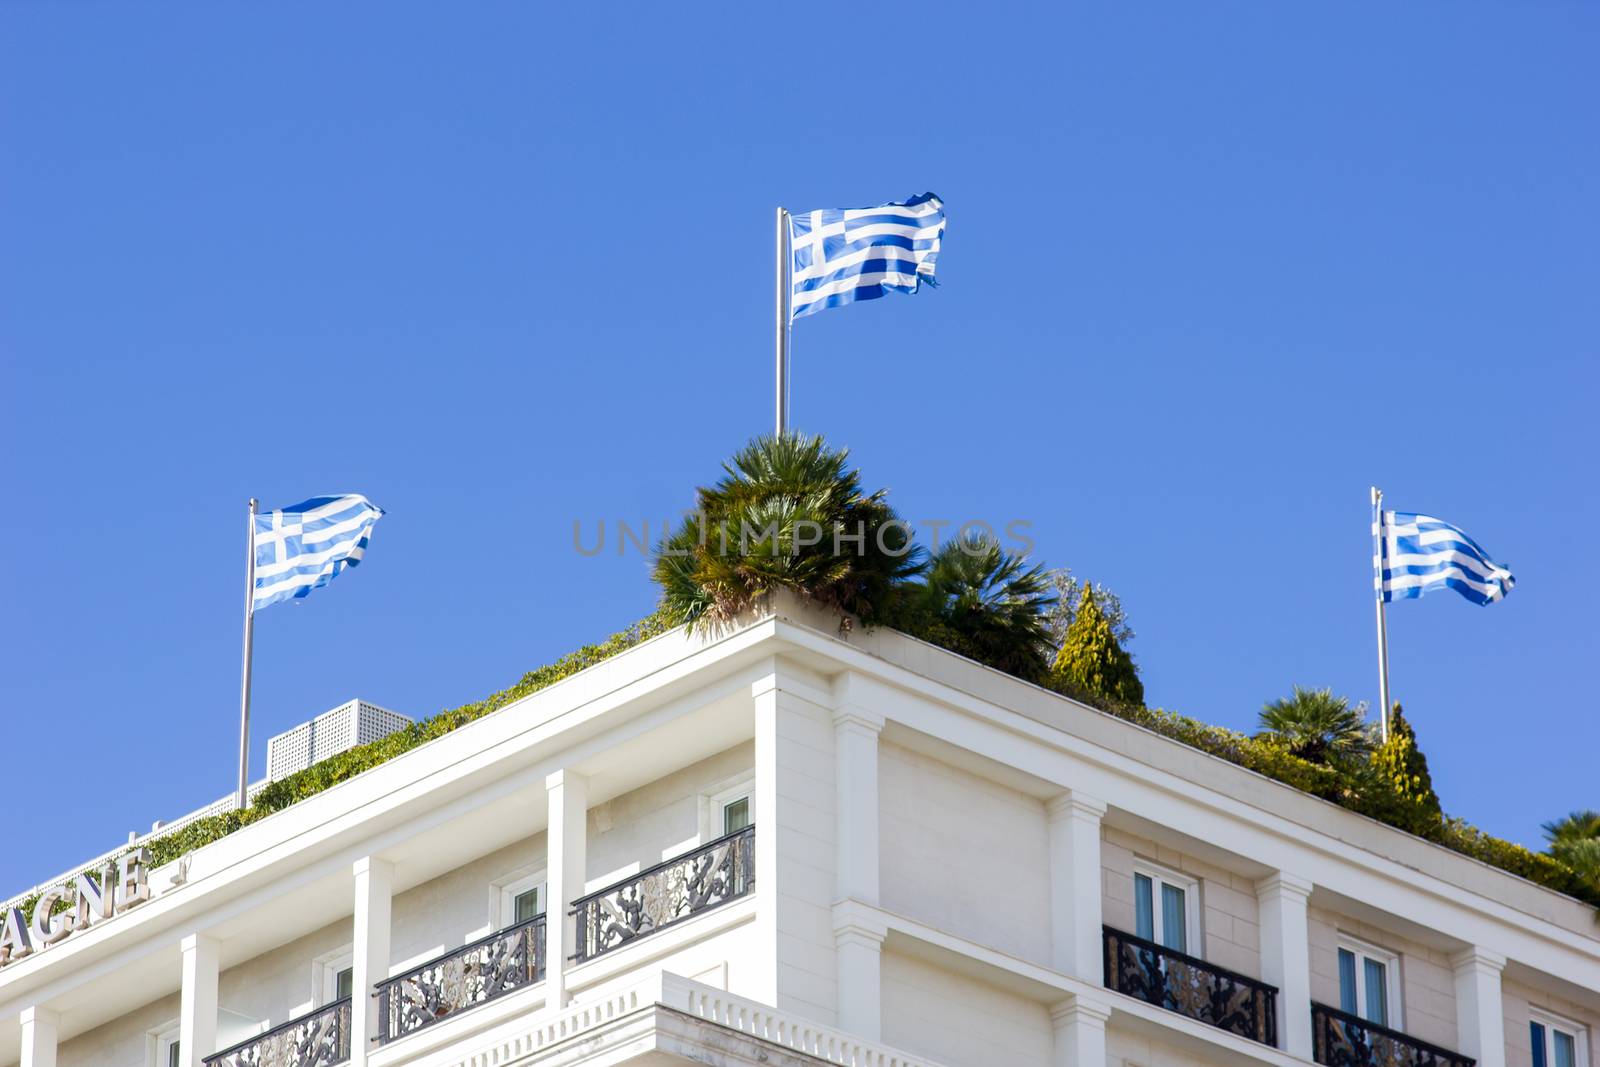 greek flags on the roof garden of a building